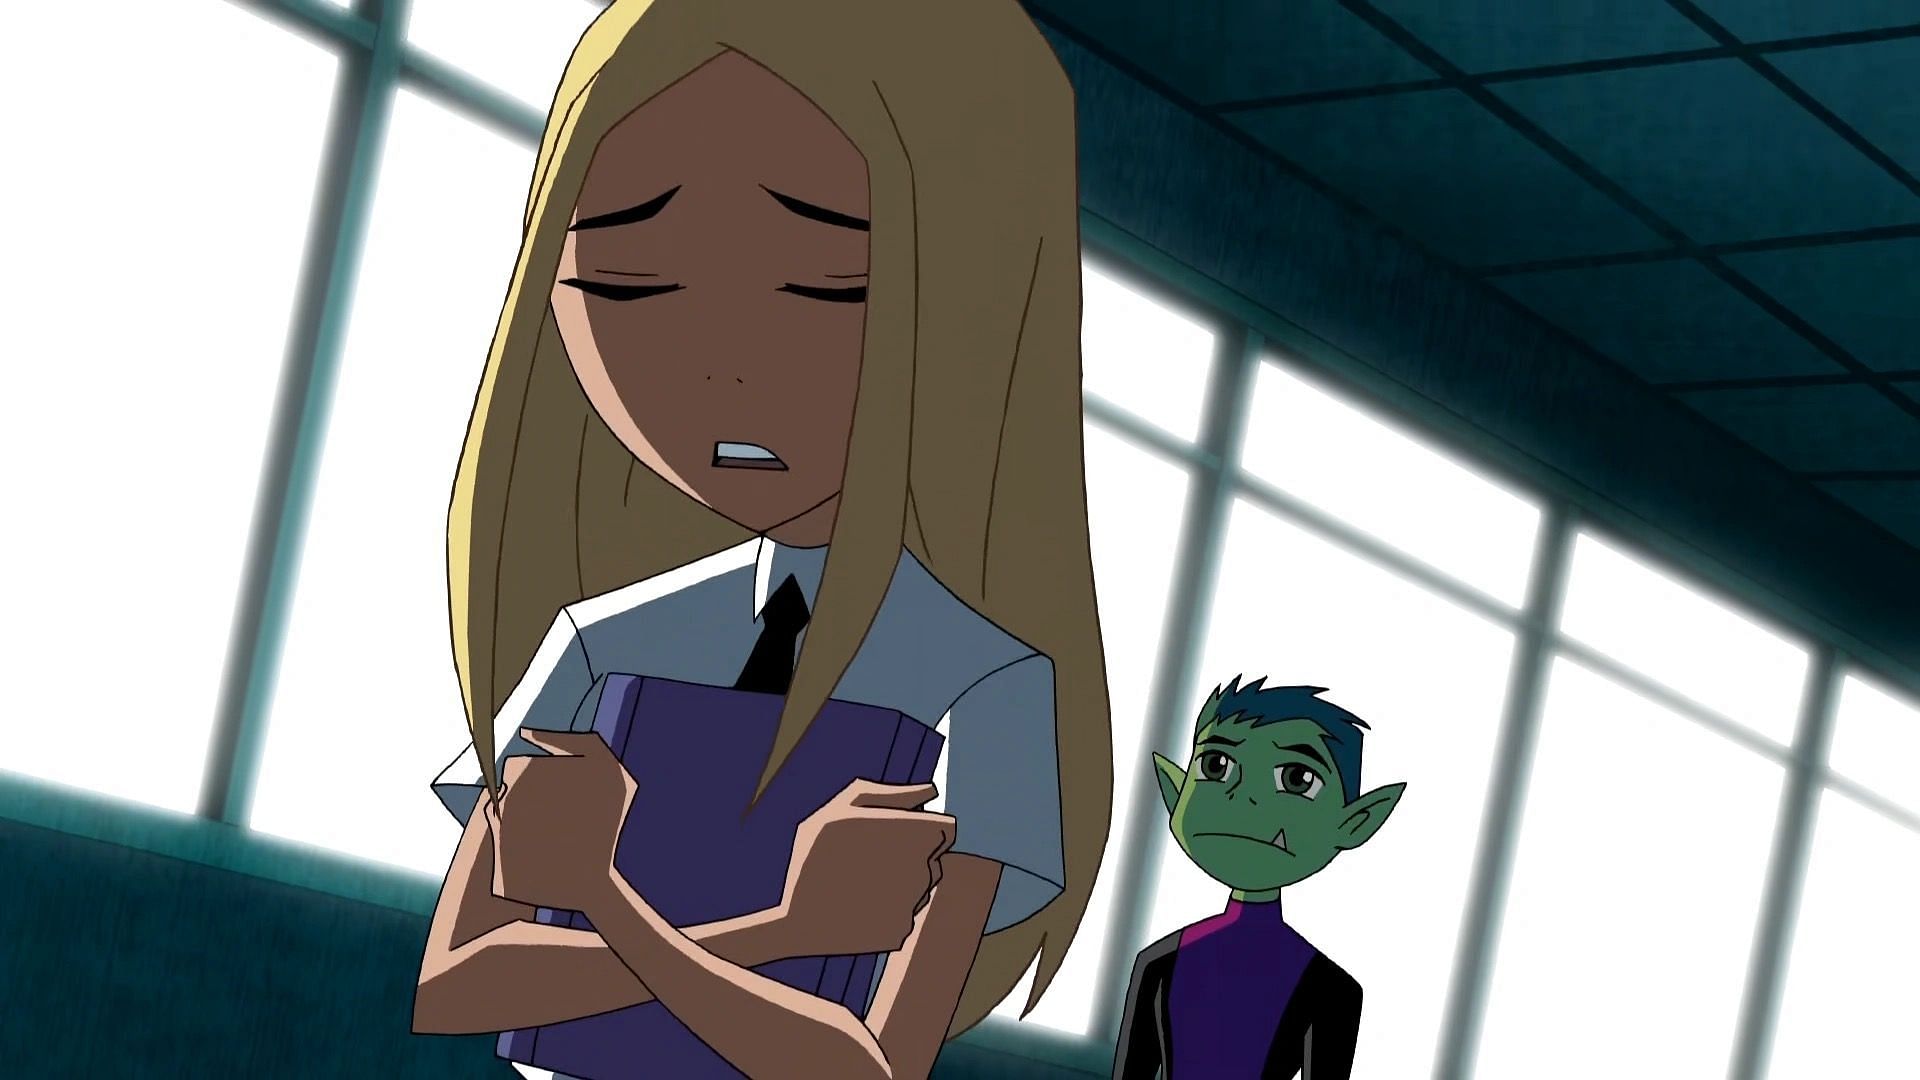 Terra and Beast Boy as they appear in the series (Image via Cartoon Network)